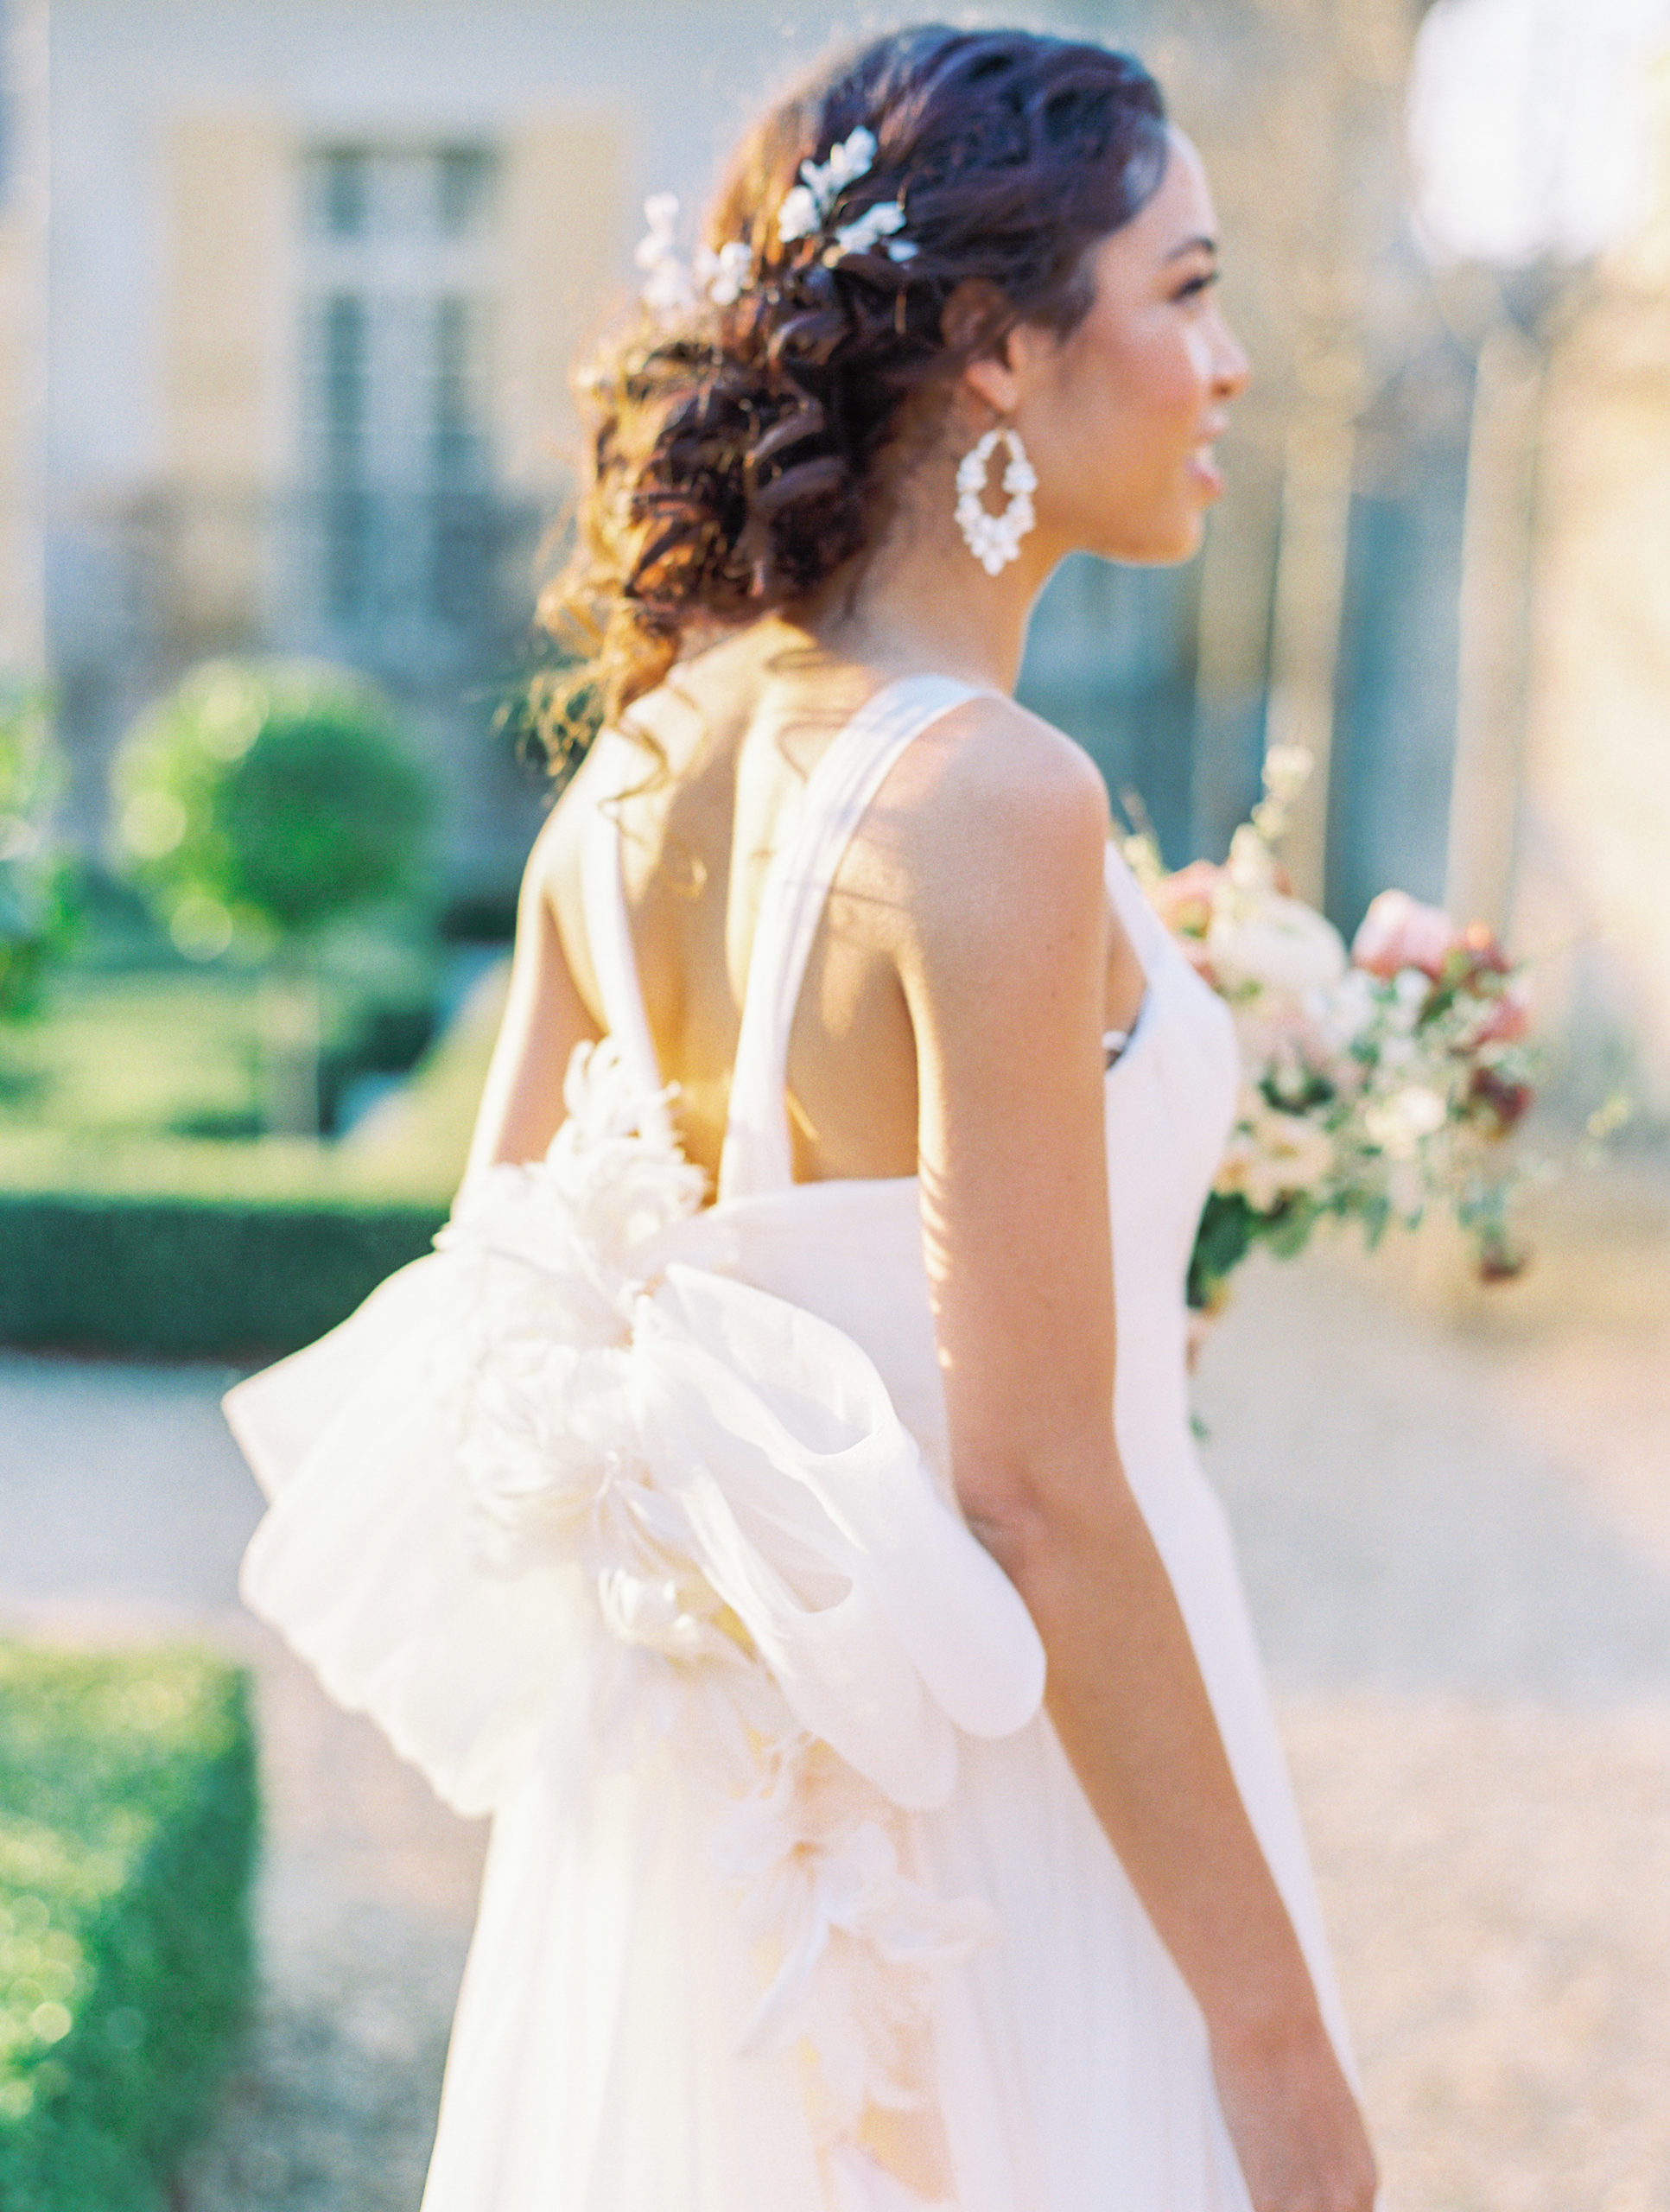 Bride looking away with cream earrings and flowers in hair at Chateau de Villette Wedding Photography